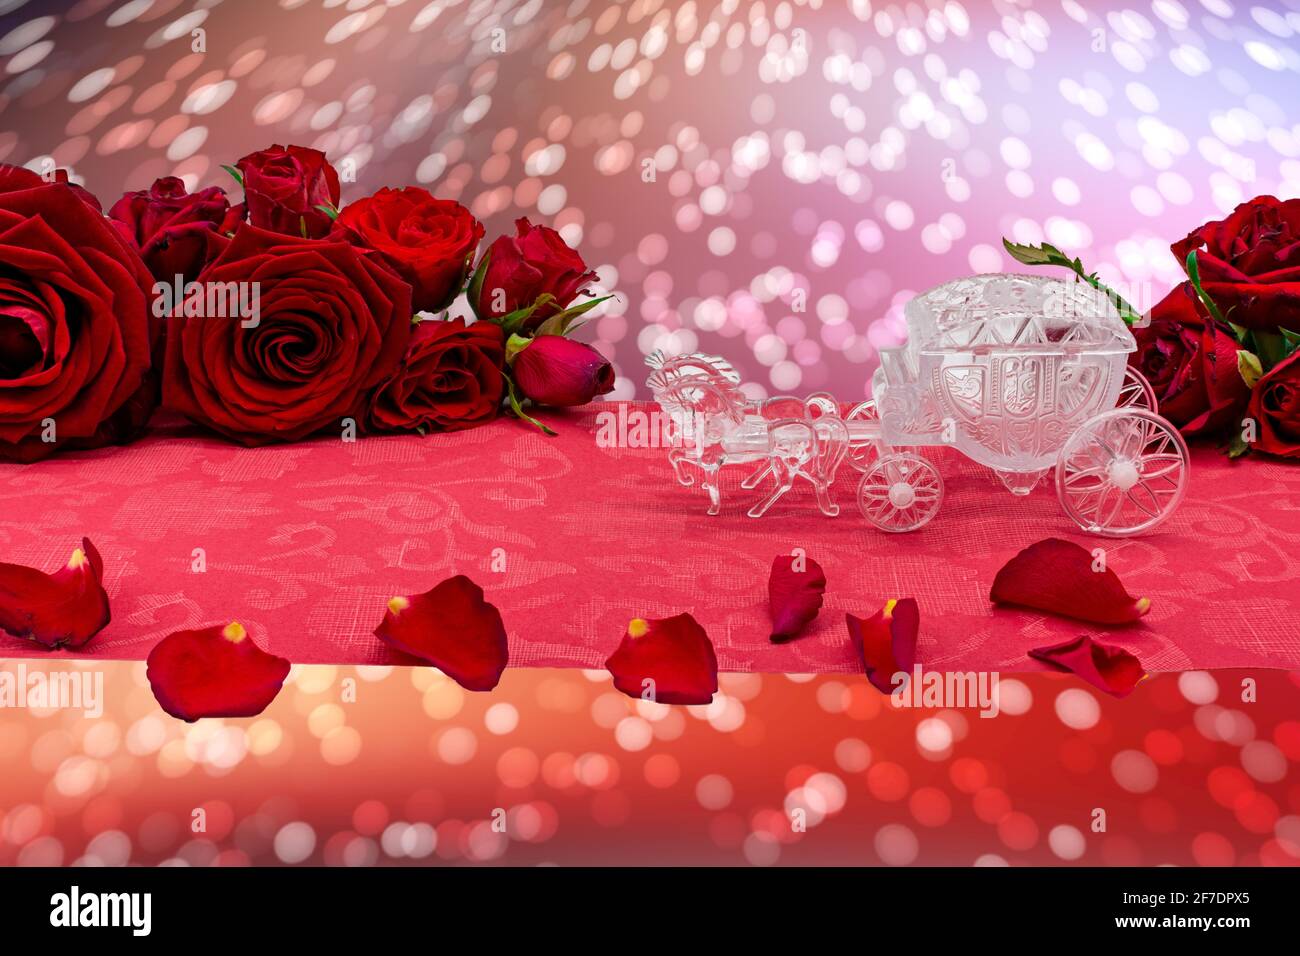 Model wedding carriage rides the red carpet between roses. Template for wedding, engagement and declaration of love, wedding anniversary posters. Stock Photo